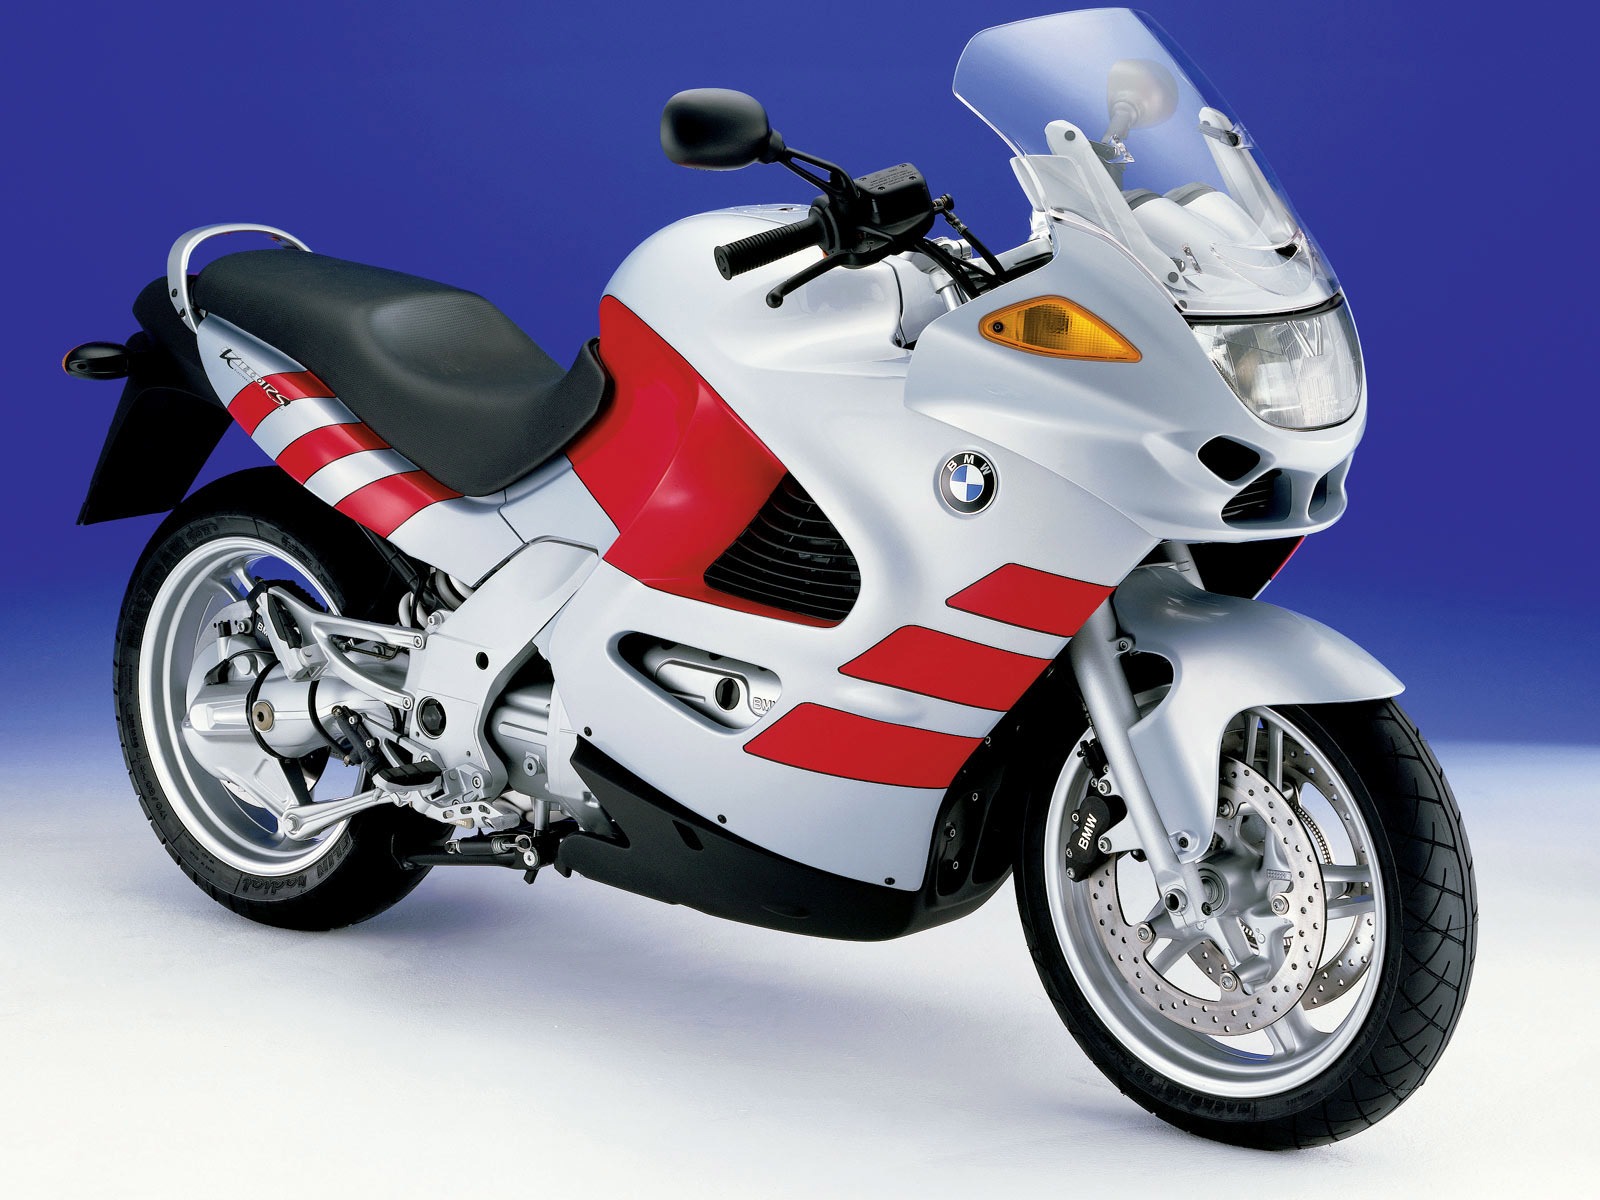 BMW motorcycle wallpapers (1) #1 - 1600x1200